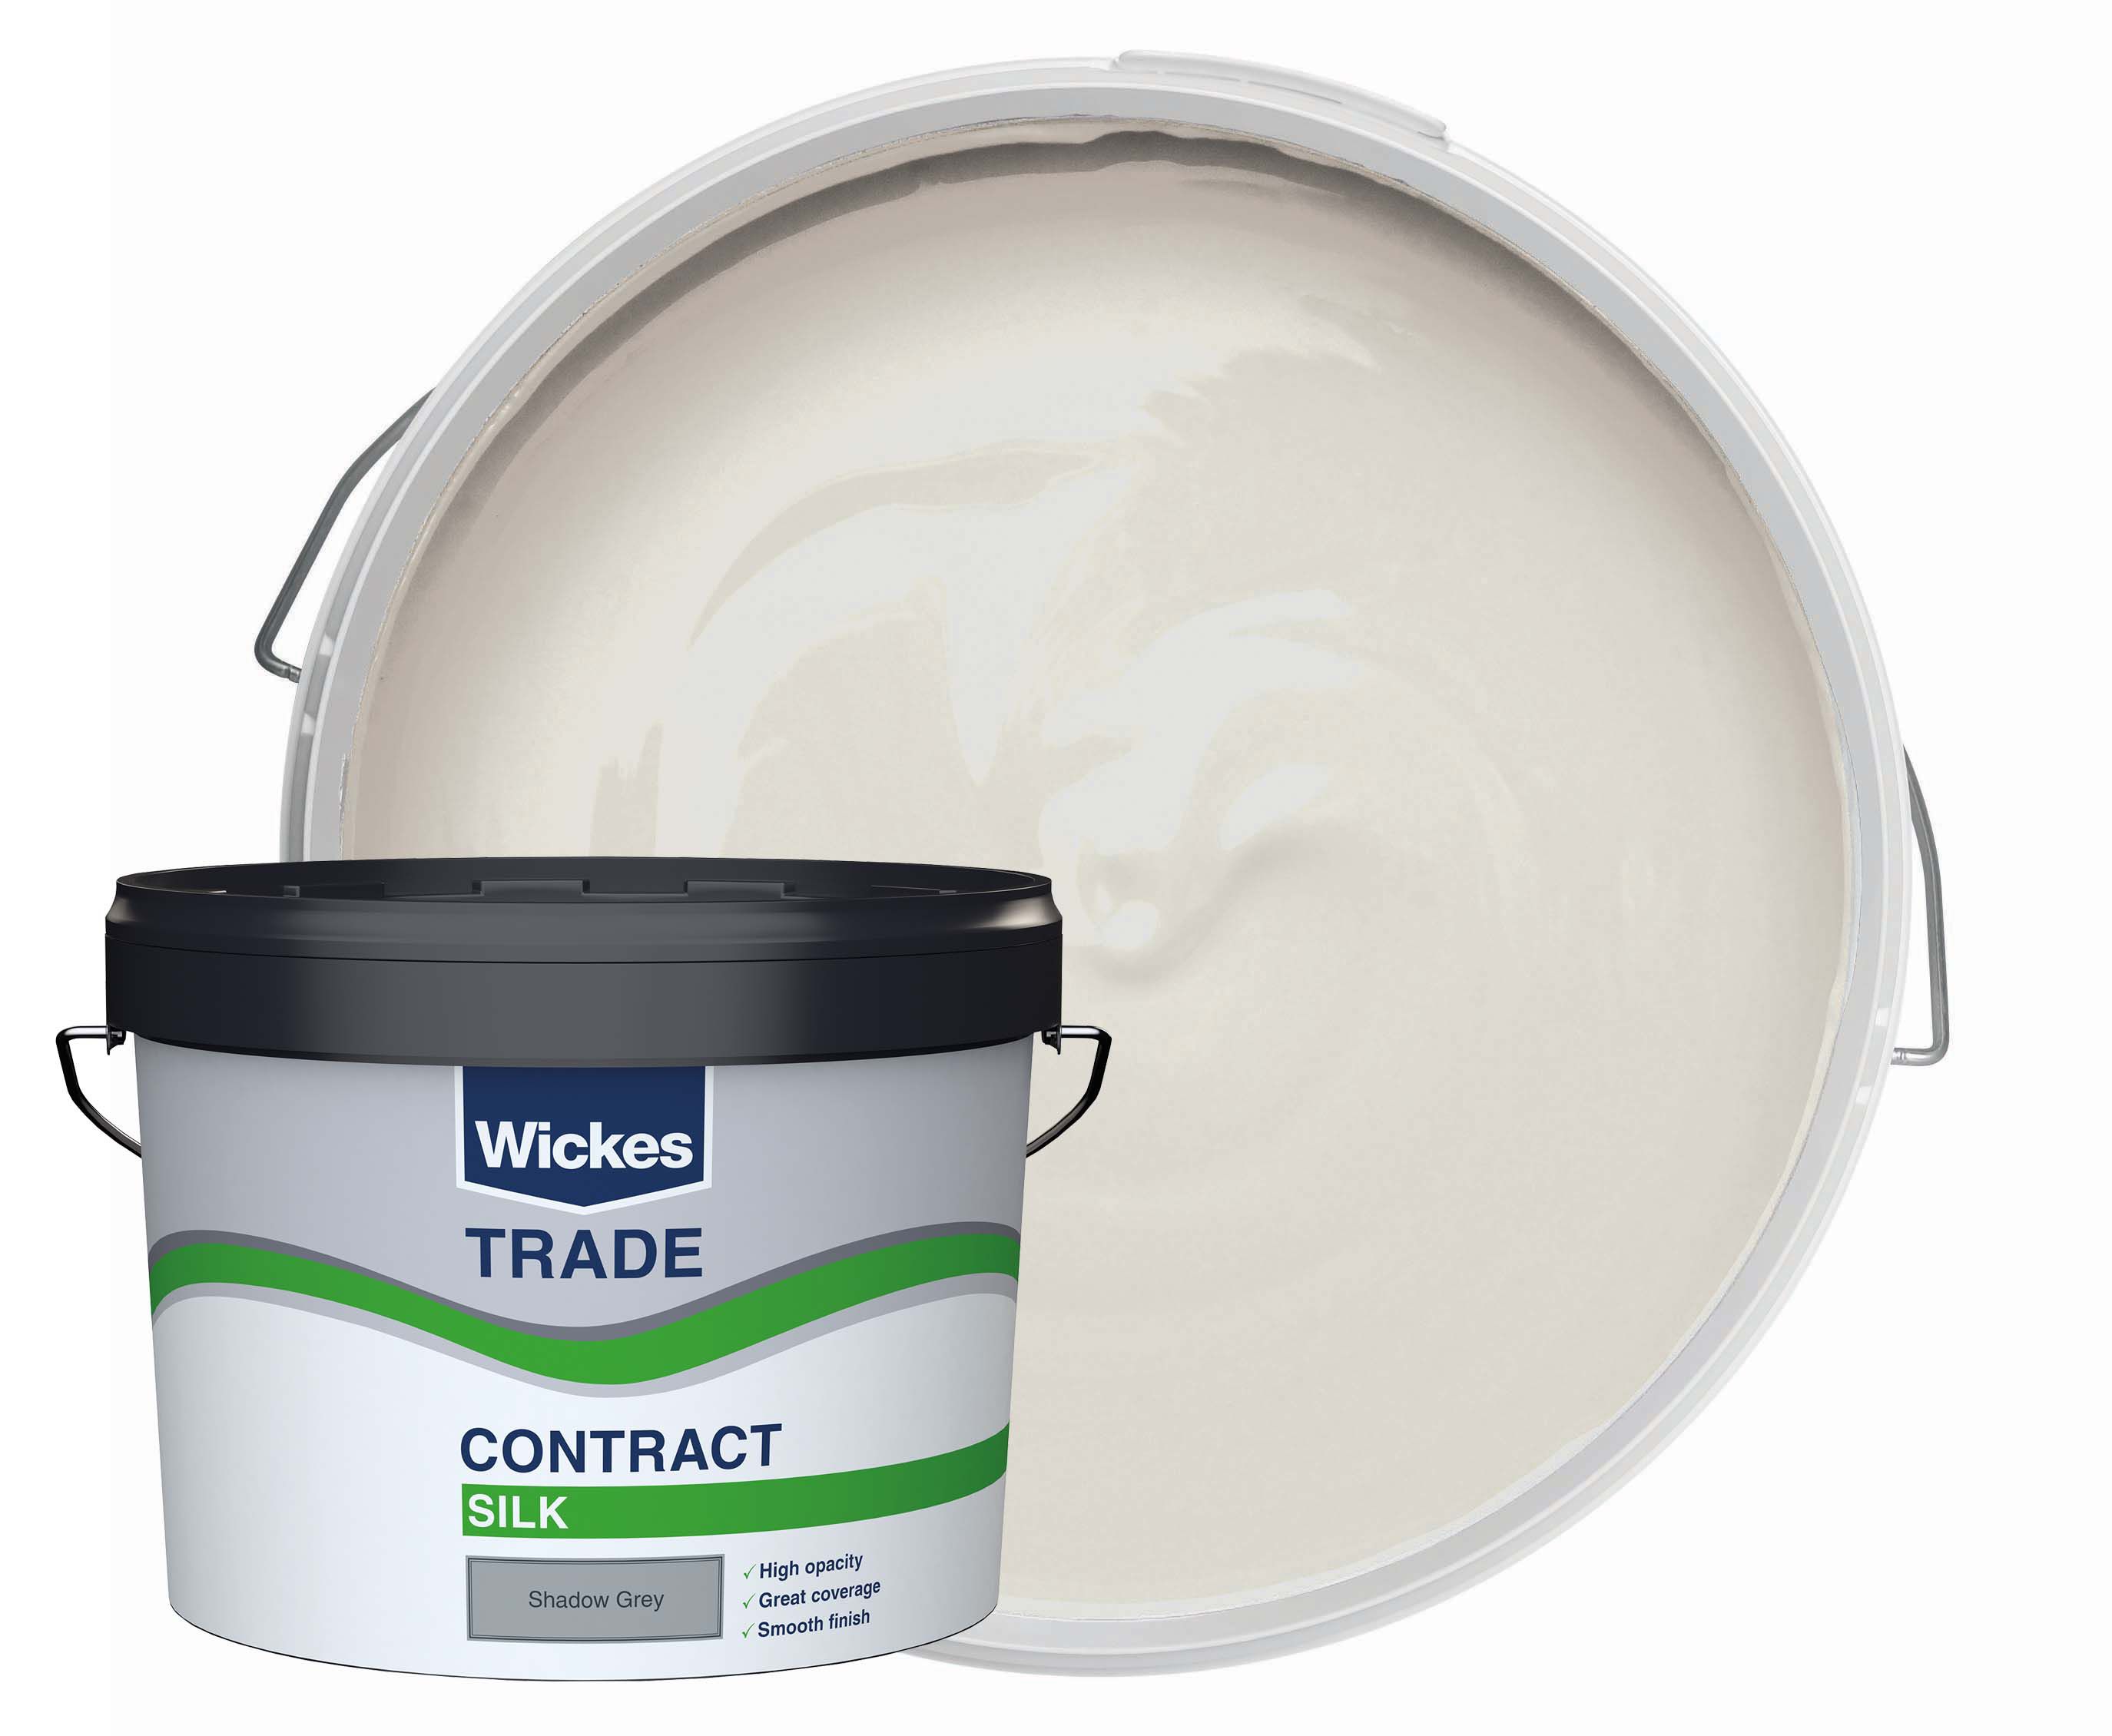 Image of Wickes Trade Contract Silk Emulsion Paint - Shadow Grey - 10L